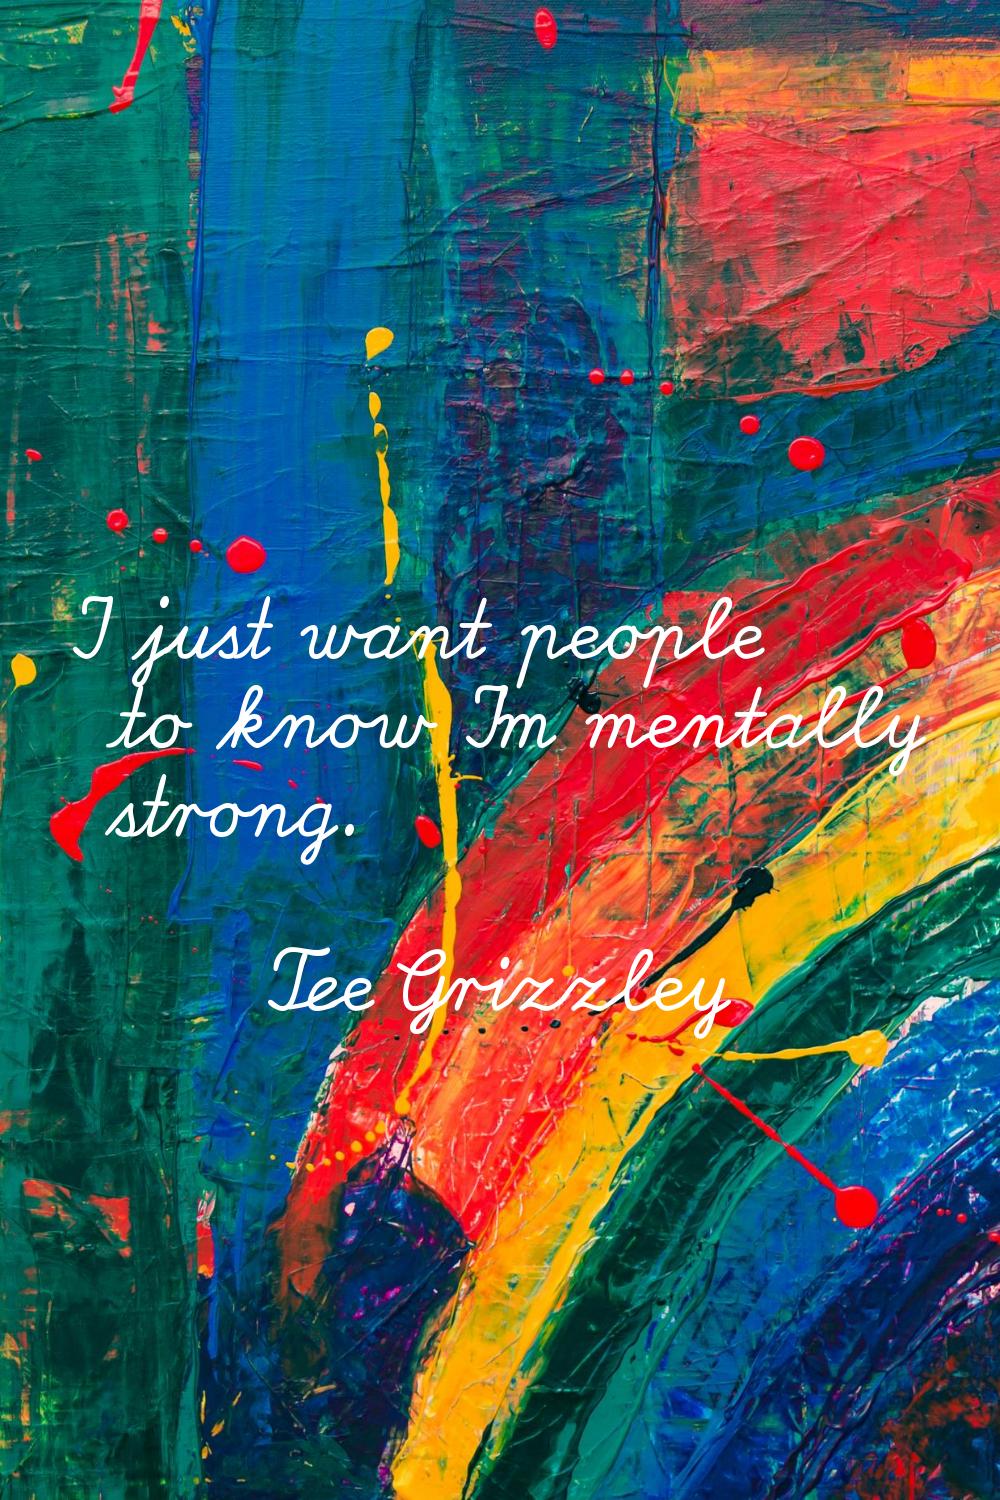 I just want people to know I'm mentally strong.